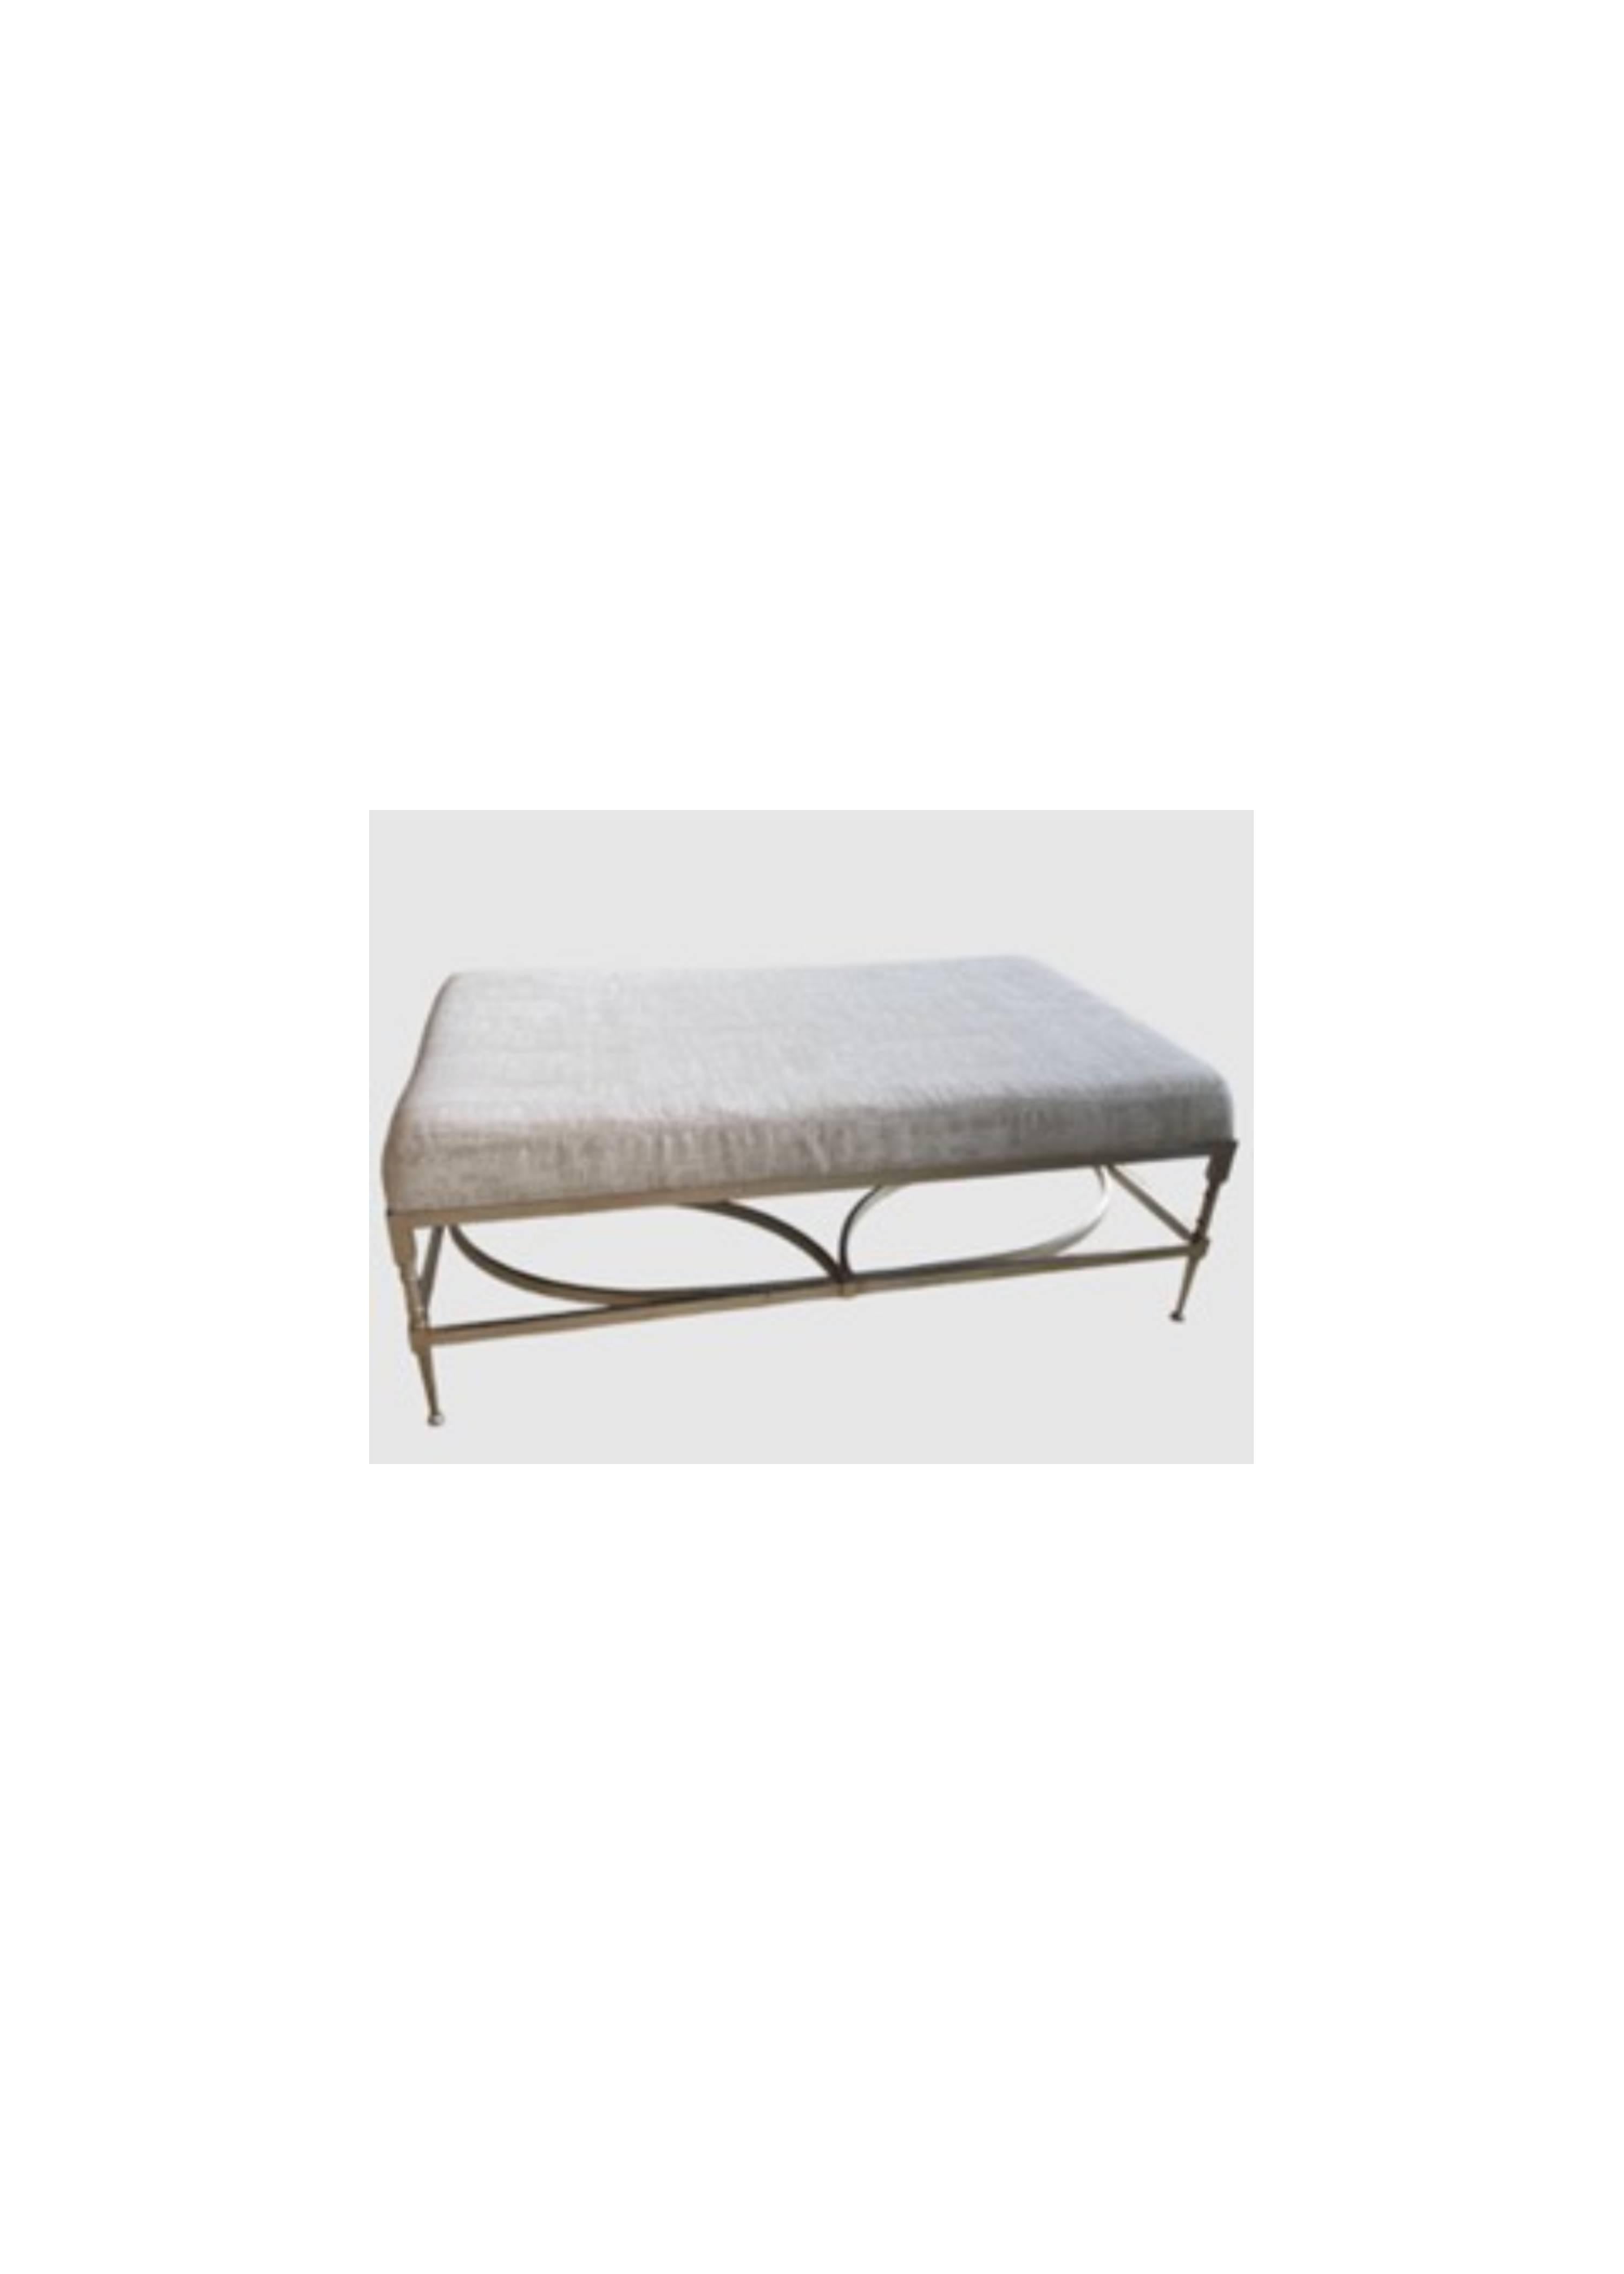 This rectangle coffee table, tightly upholstered an attractive neutral performance fabric, has a visually appealing geometric oval-within-a- rectangle sturdy nickel frame. 